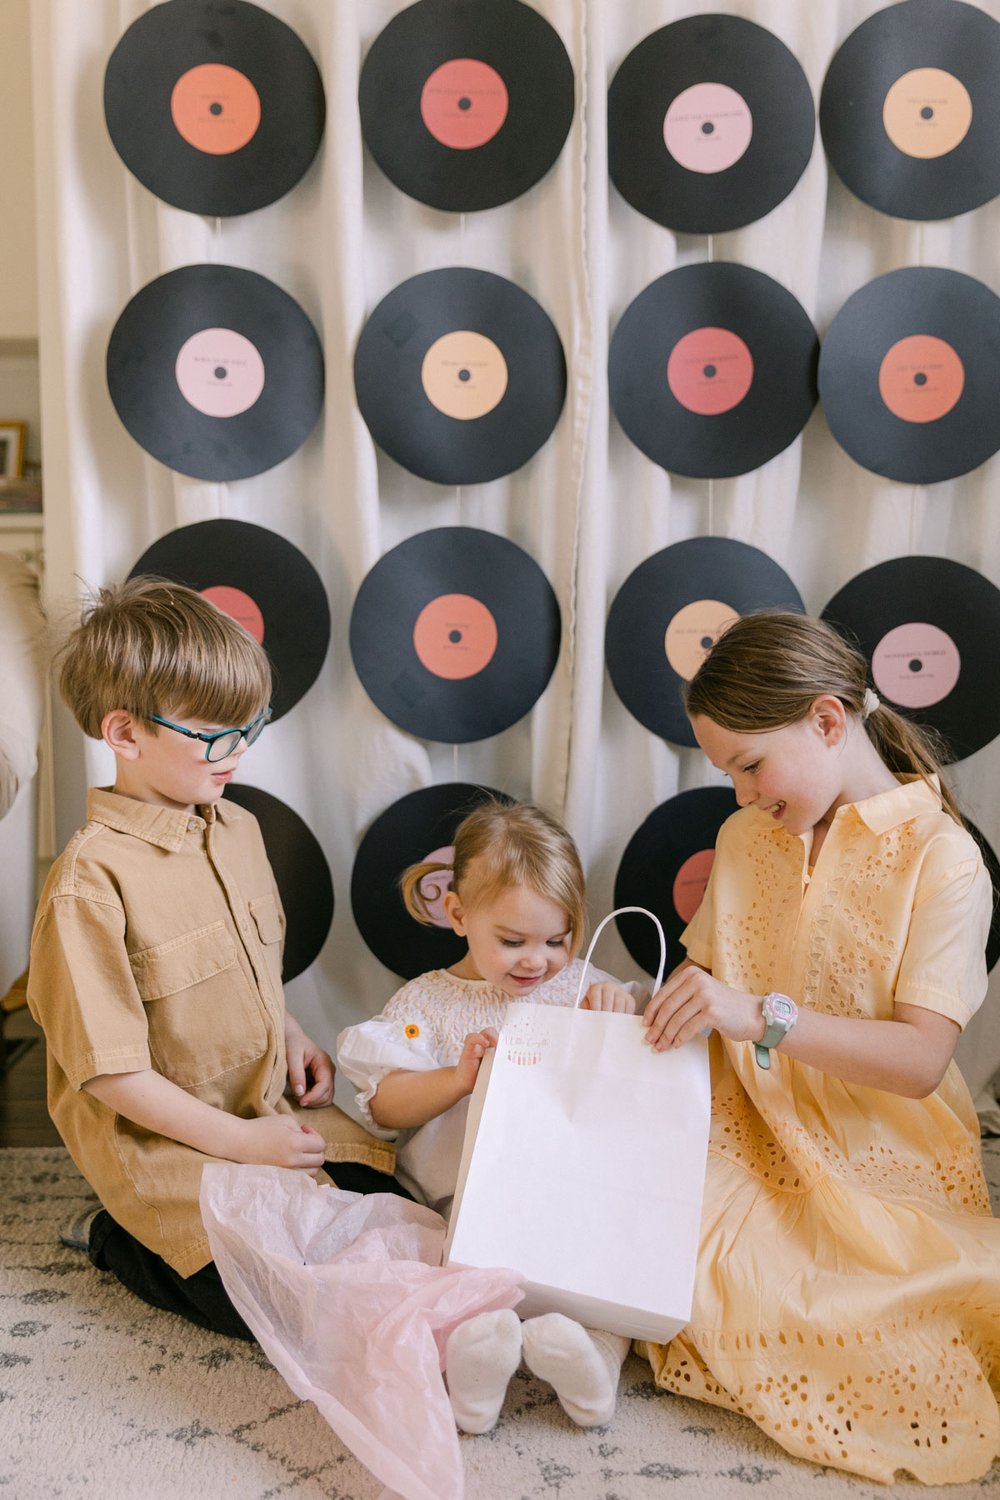 "Two Groovy" Birthday Party Theme - Inspiration and Free Downloads Calgary Family Lifestyle Photographer Jennie Guenard Photography